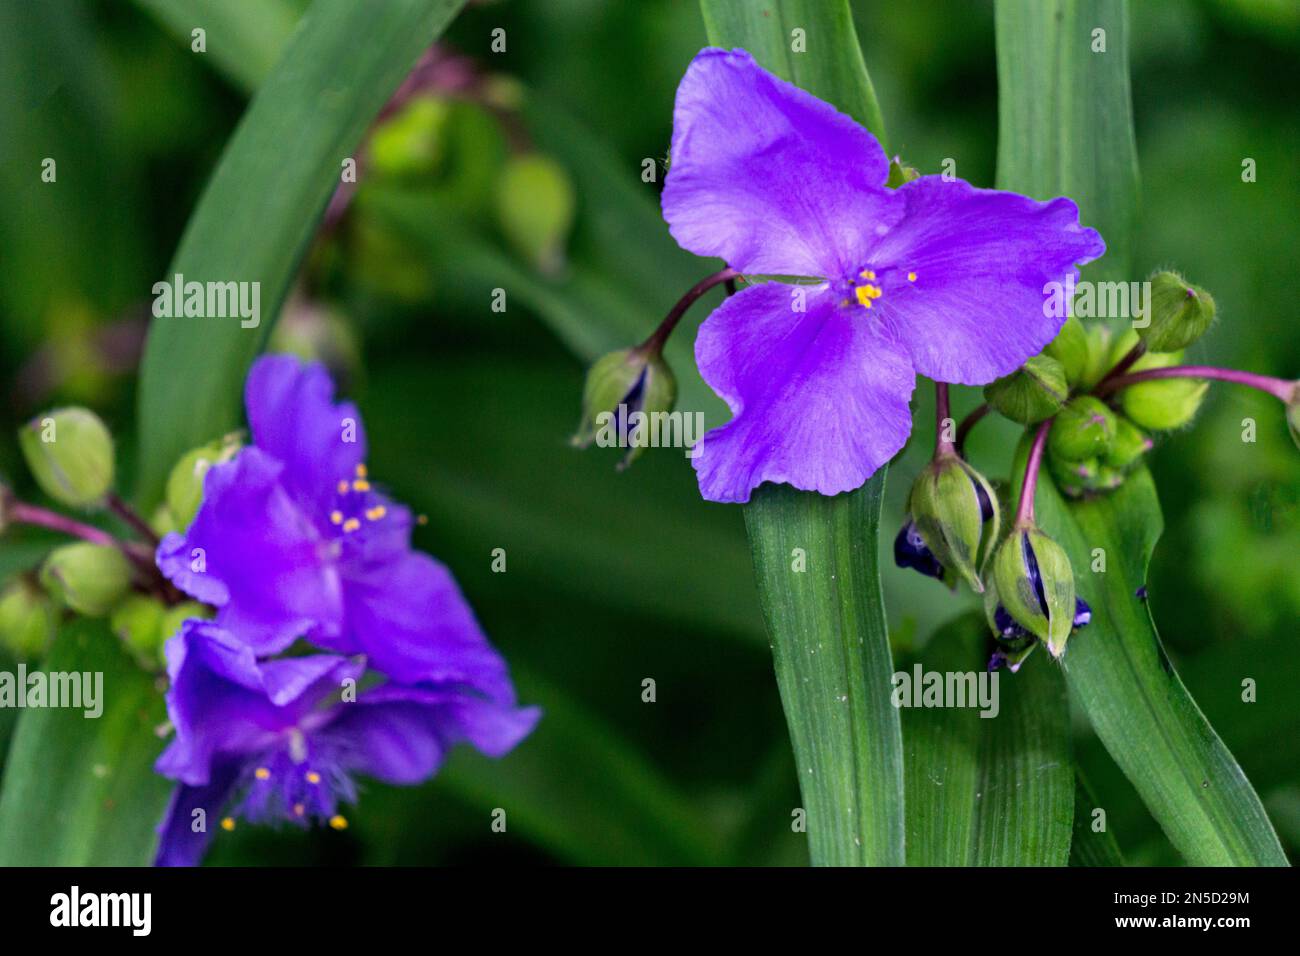 Blue Virginia tradescantia flower surrounded by green leaves Stock Photo